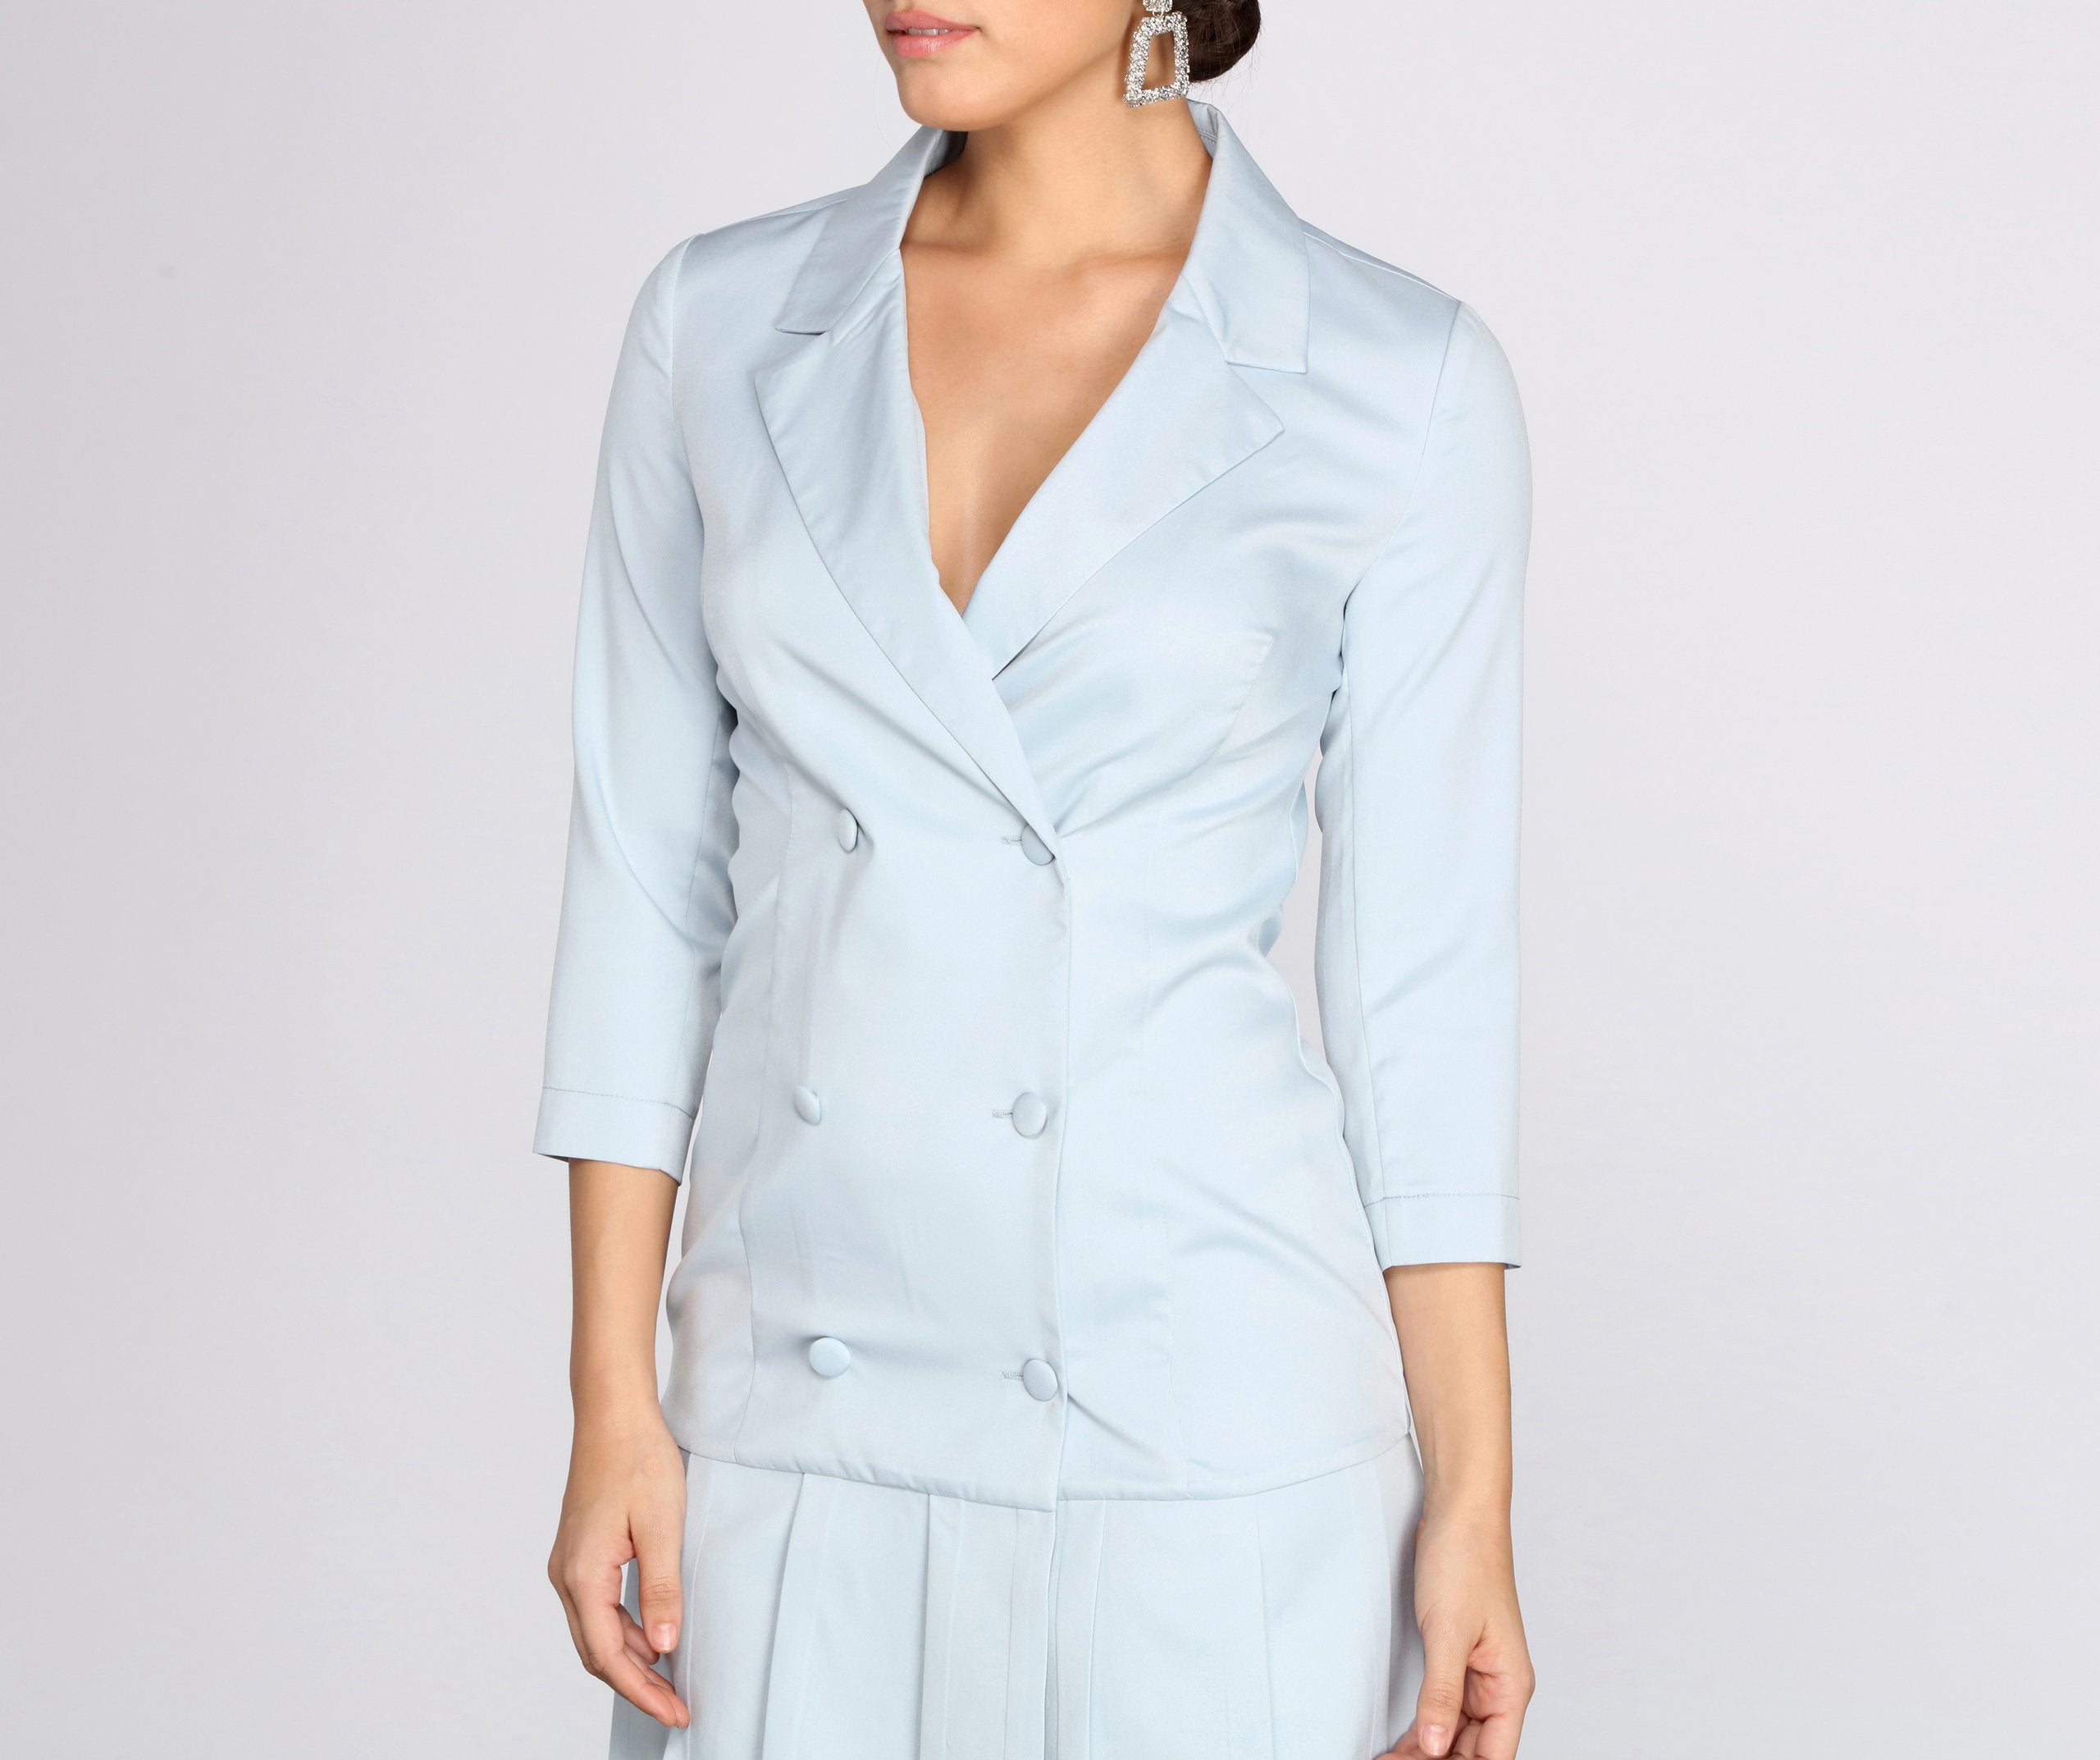 Back To Business Trench Dress - Lady Occasions